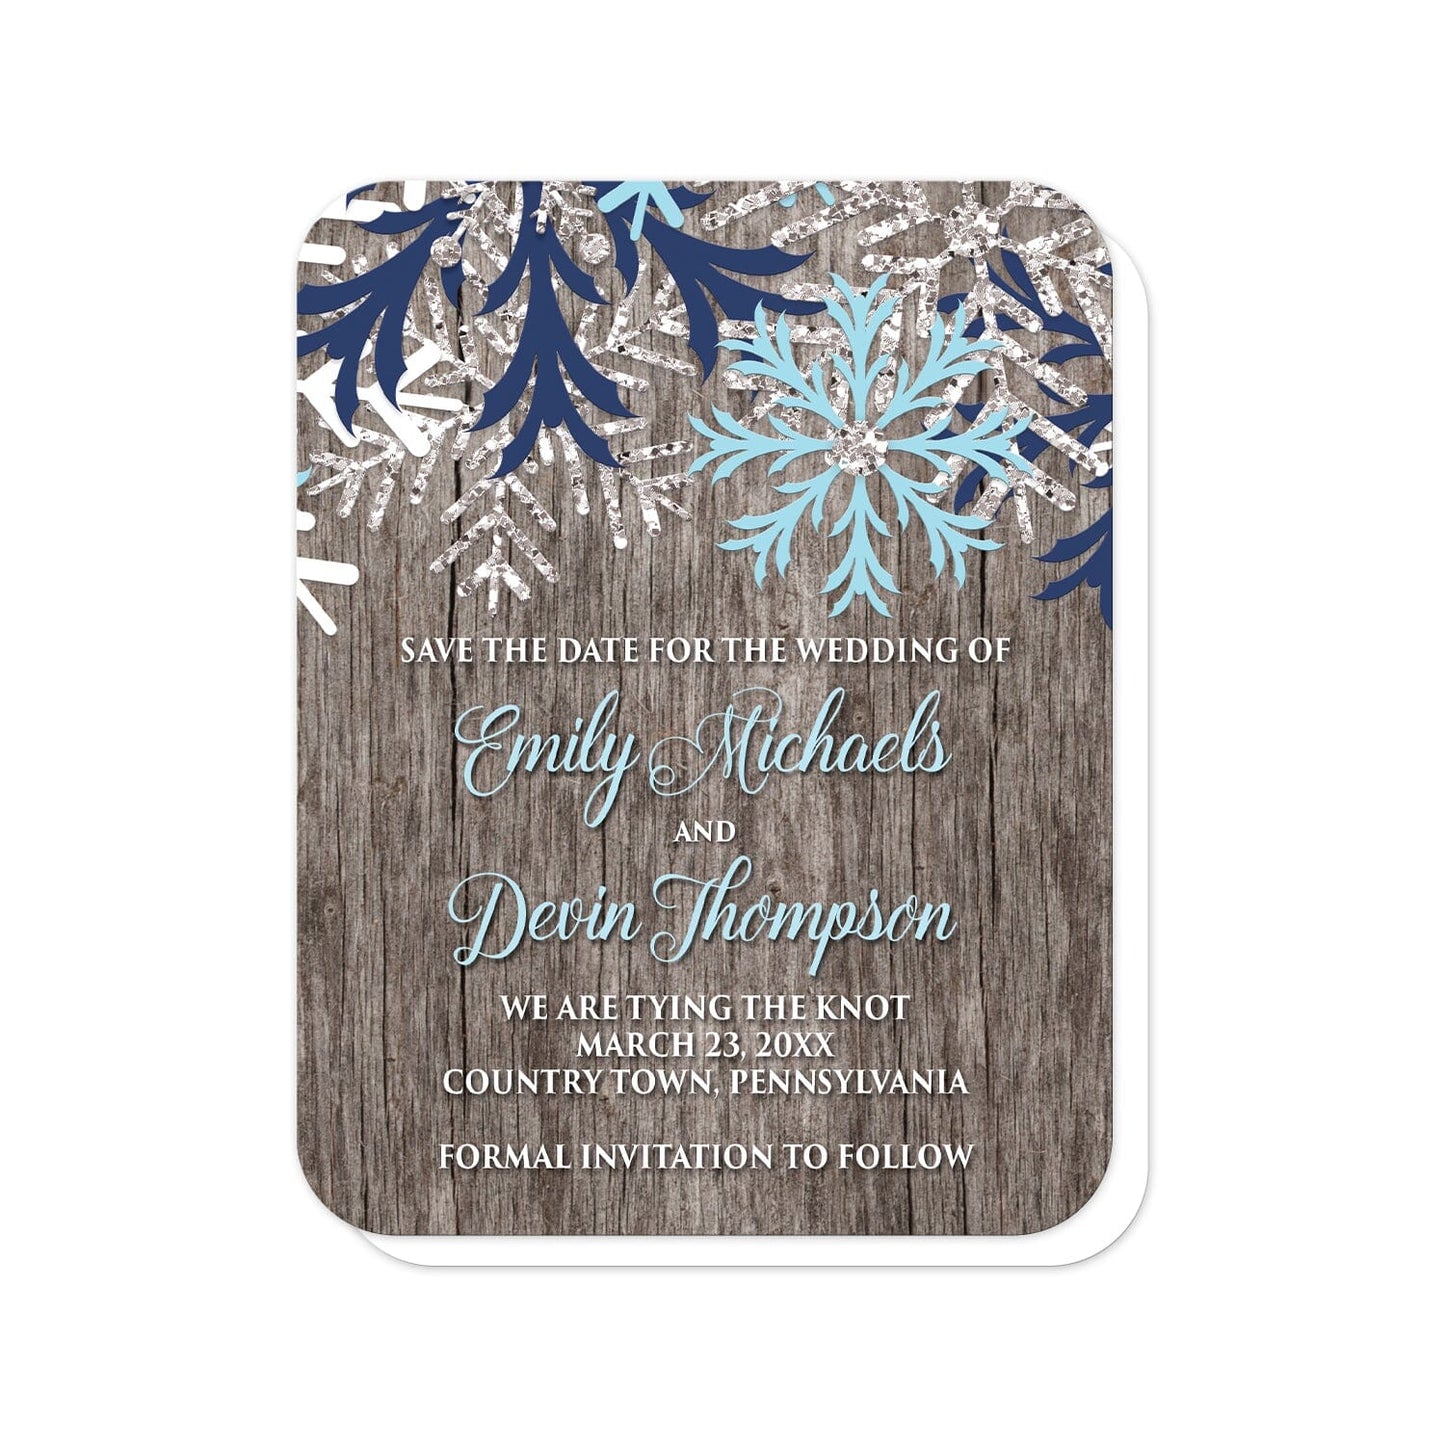 Rustic Winter Wood Navy Aqua Snowflake Save the Date Cards (with rounded corners) at Artistically Invited. Country-inspired rustic winter wood navy aqua snowflake save the date cards designed with light aqua blue, navy blue, white, and silver-colored glitter-illustrated snowflakes along the top over a rustic wood pattern illustration. Your personalized wedding date details are custom printed in aqua blue and white over the wood background below the snowflakes.